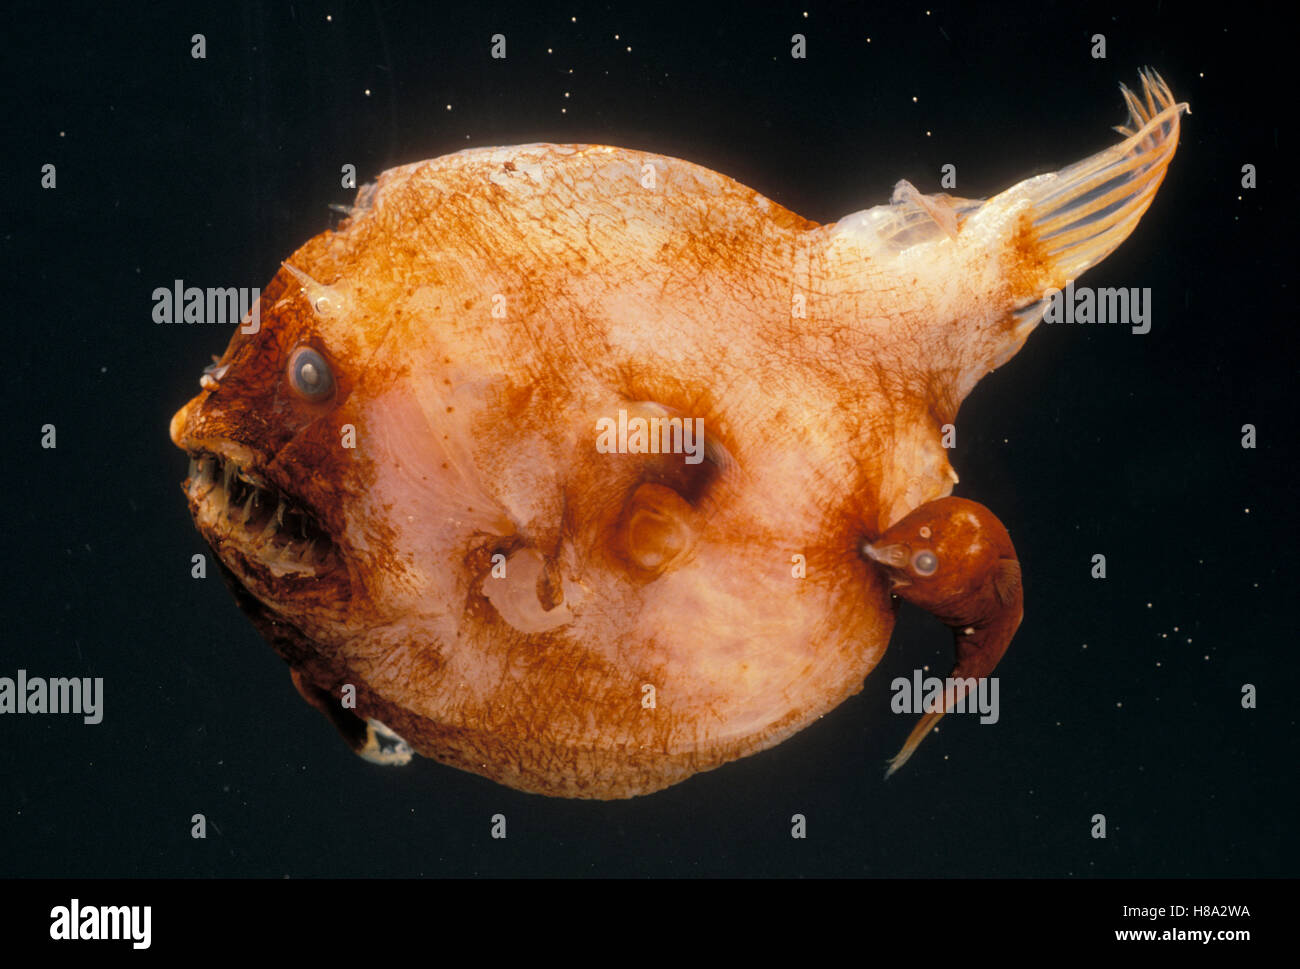 Devil Angler (Linophryne indica) fish, deep sea species showing large  female with dwarf male attached Stock Photo - Alamy